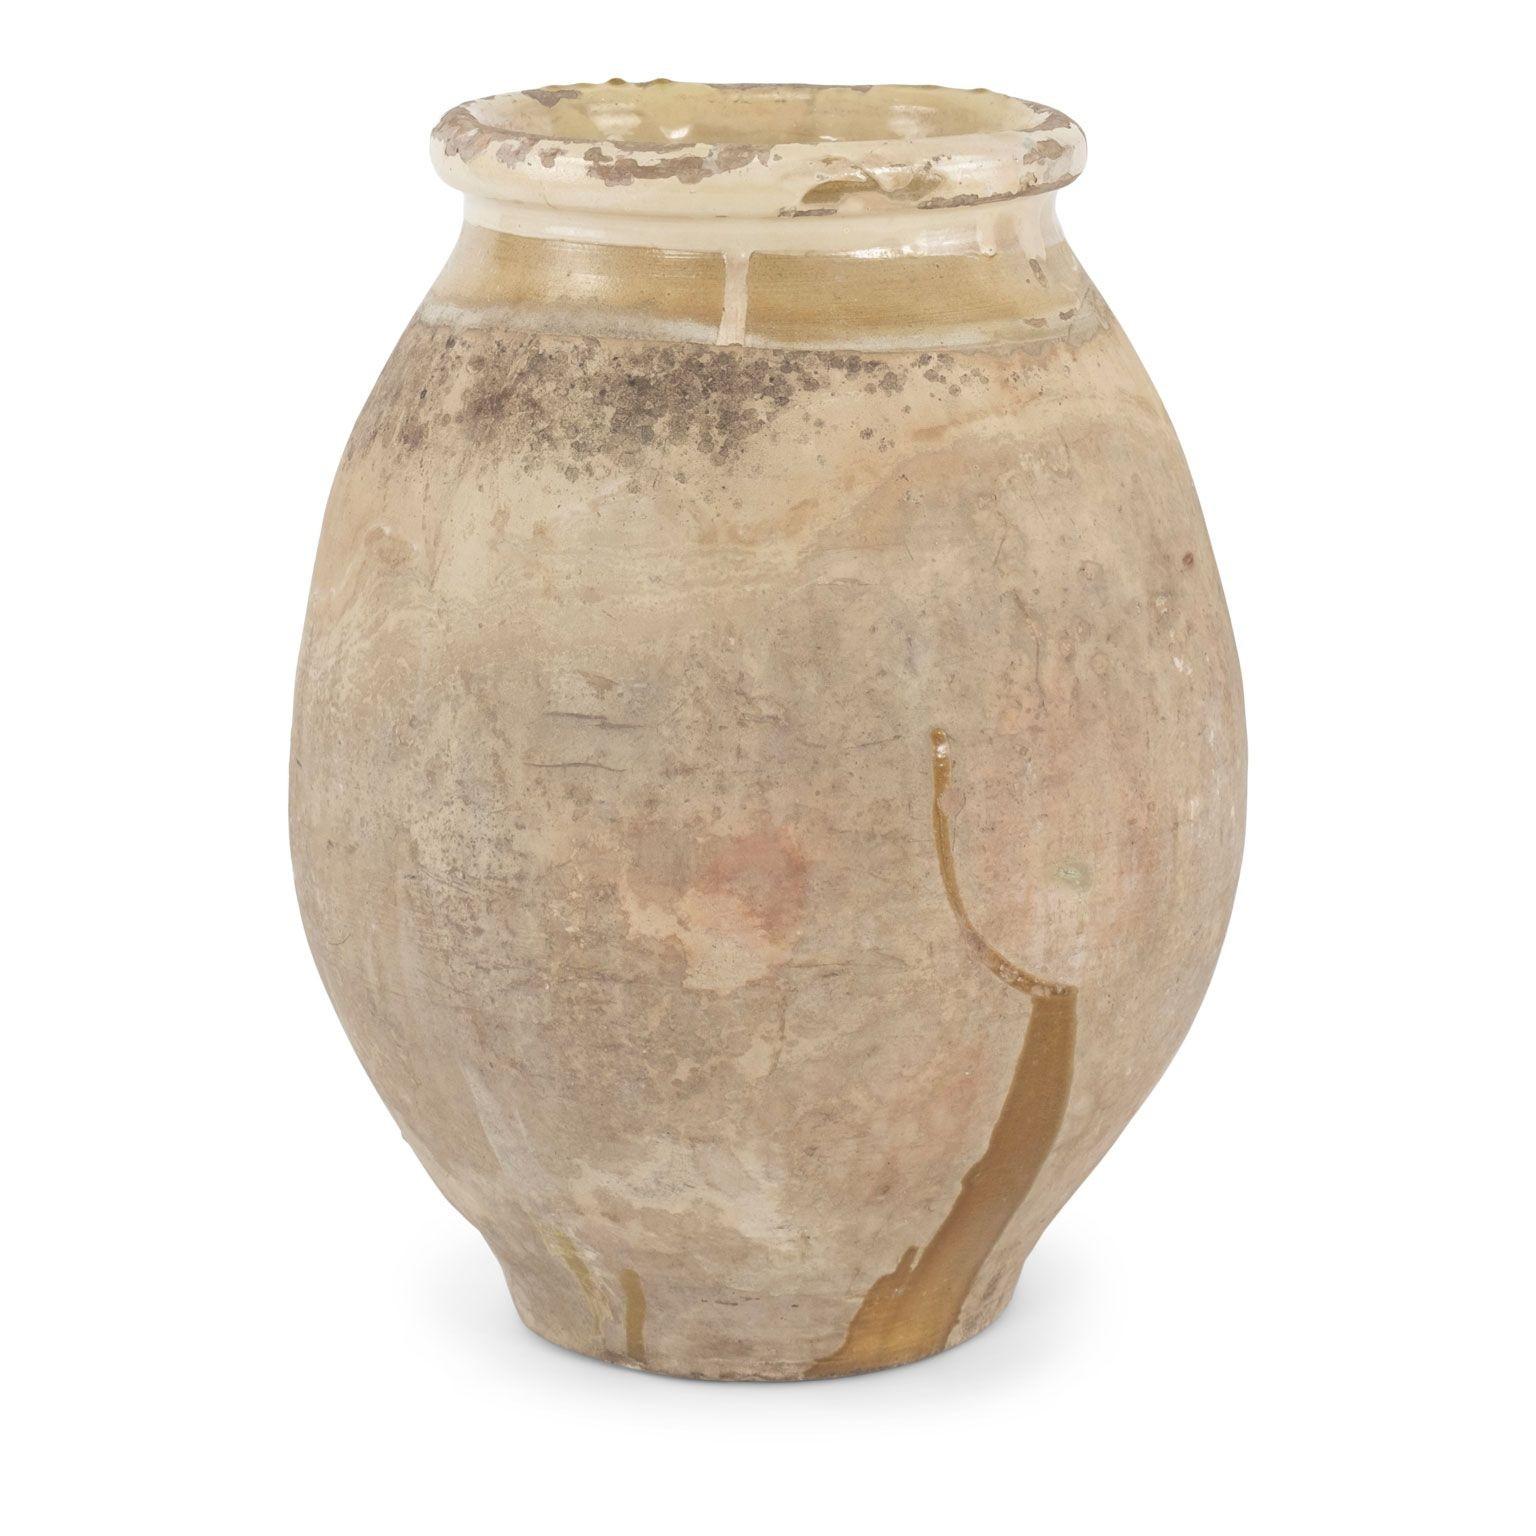 French Biot jar with yellow glazed rim dating to the Mid-19th century. Nice patina and pitted surface from decades of natural wear and use.